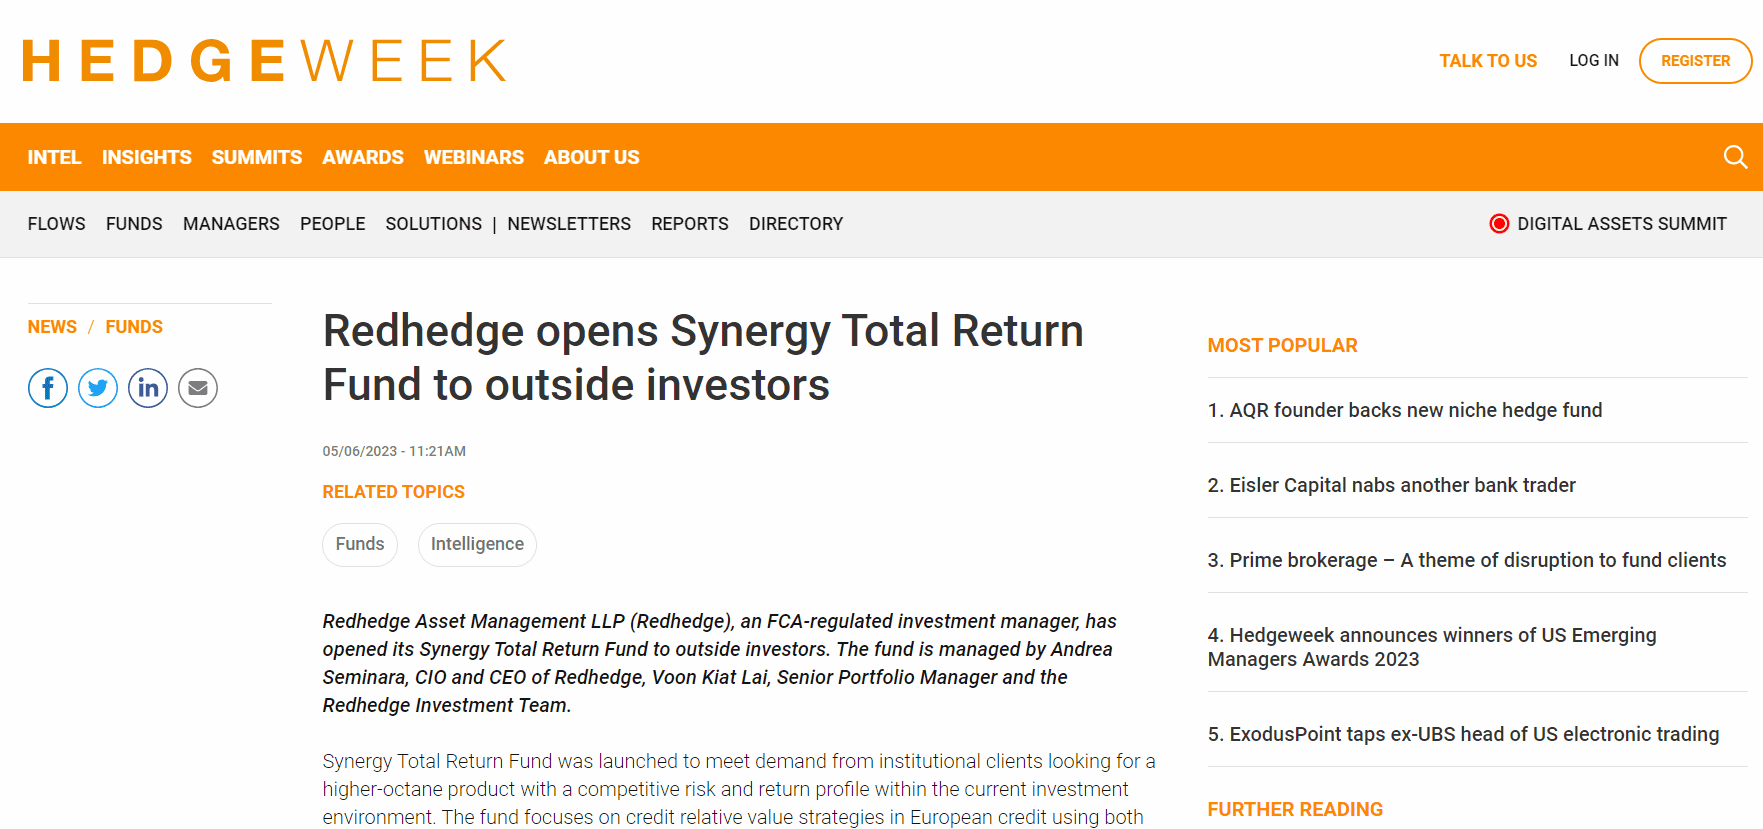 Hedgeweek: ‘Redhedge opens Synergy Total Return Fund to outside investors’